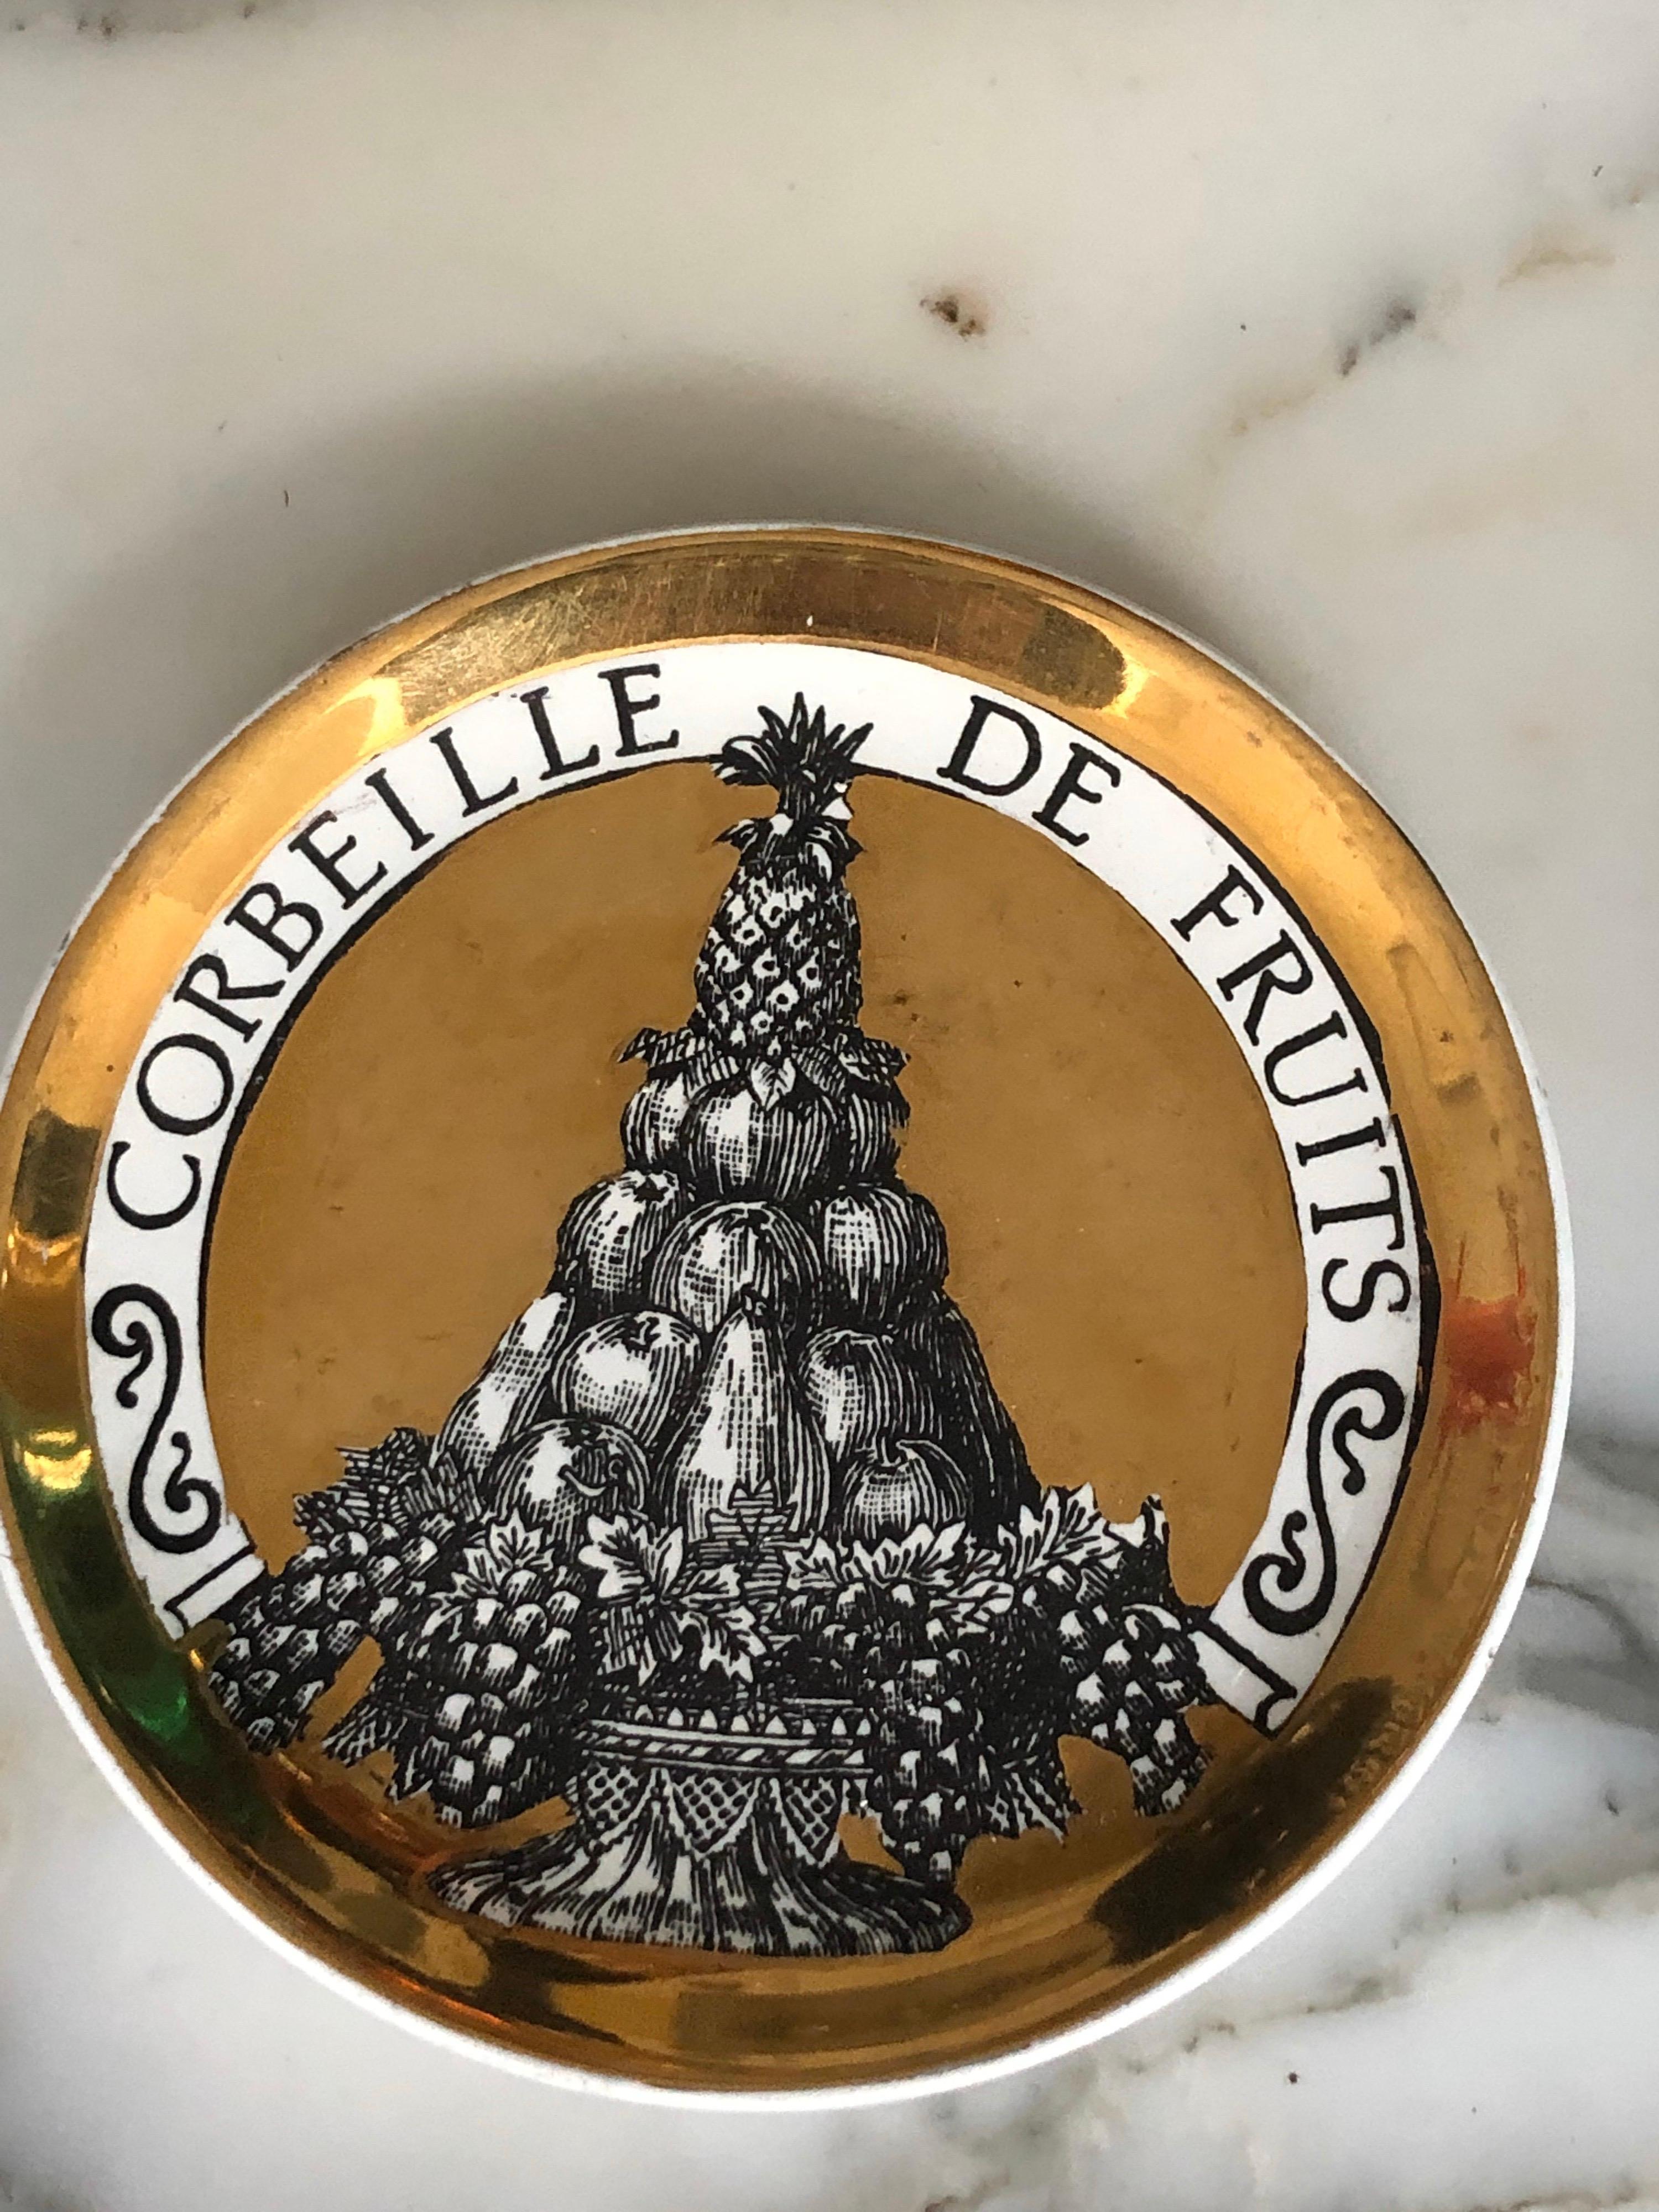 Piero Fornasetti Gilded Porcelain Coaster Set, French Cuisine from 1950 2